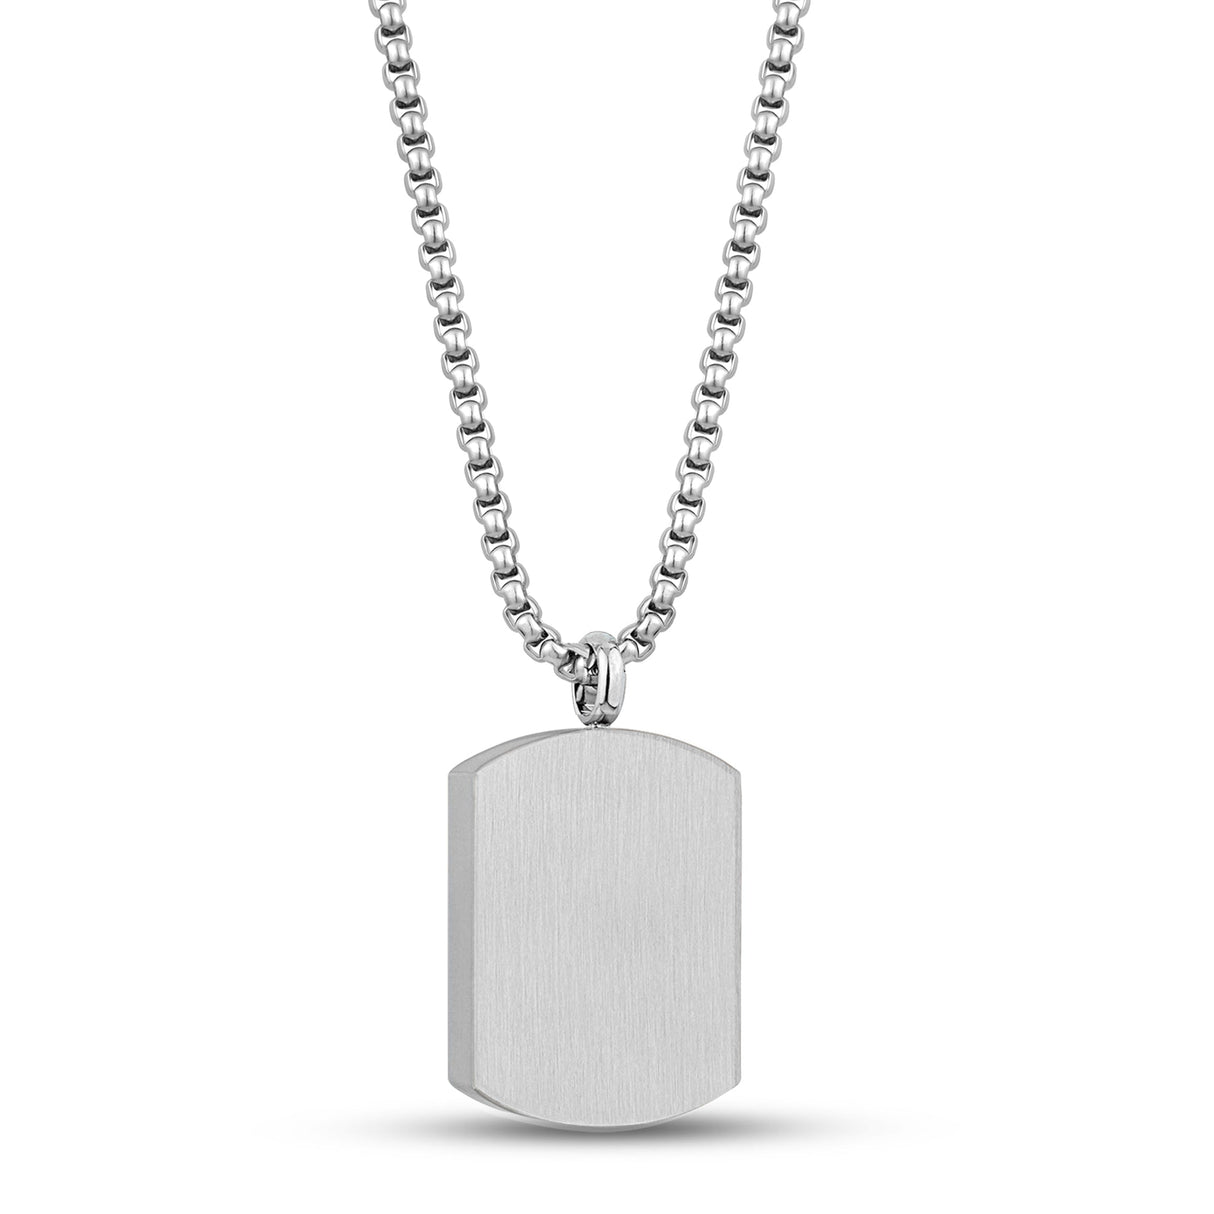 Double Dog Tag Pendant Necklace for Men Personalized Stainless Steel Male  Jewelry Free Engraving